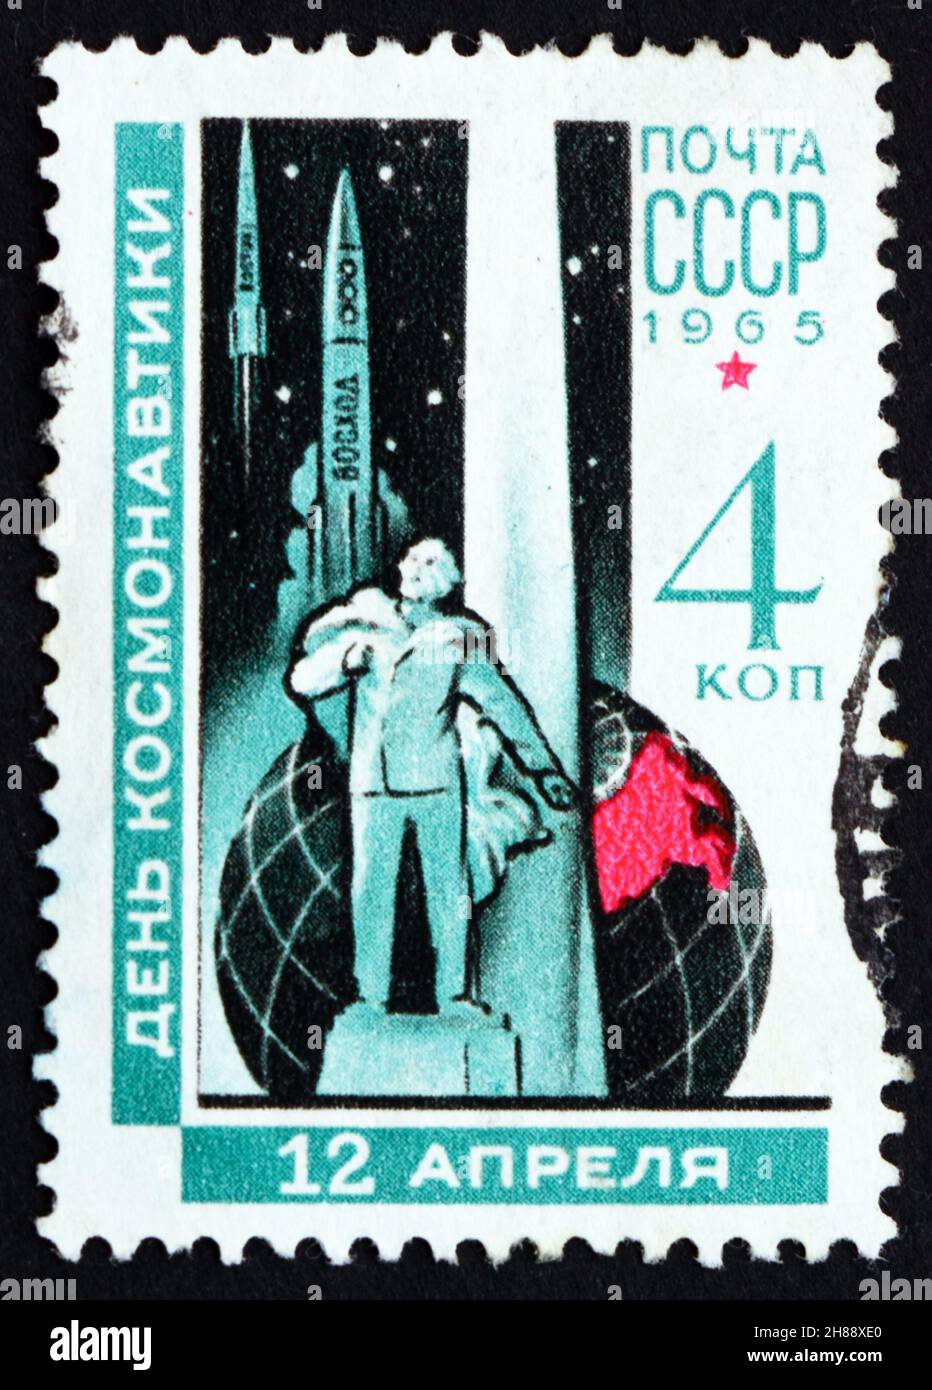 RUSSIA - CIRCA 1965: a stamp printed in the Russia shows Konstantin Tsiolkovsky Monument, Kaluga, Globe and Rockets, Rocket Scientist, circa 1965 Stock Photo